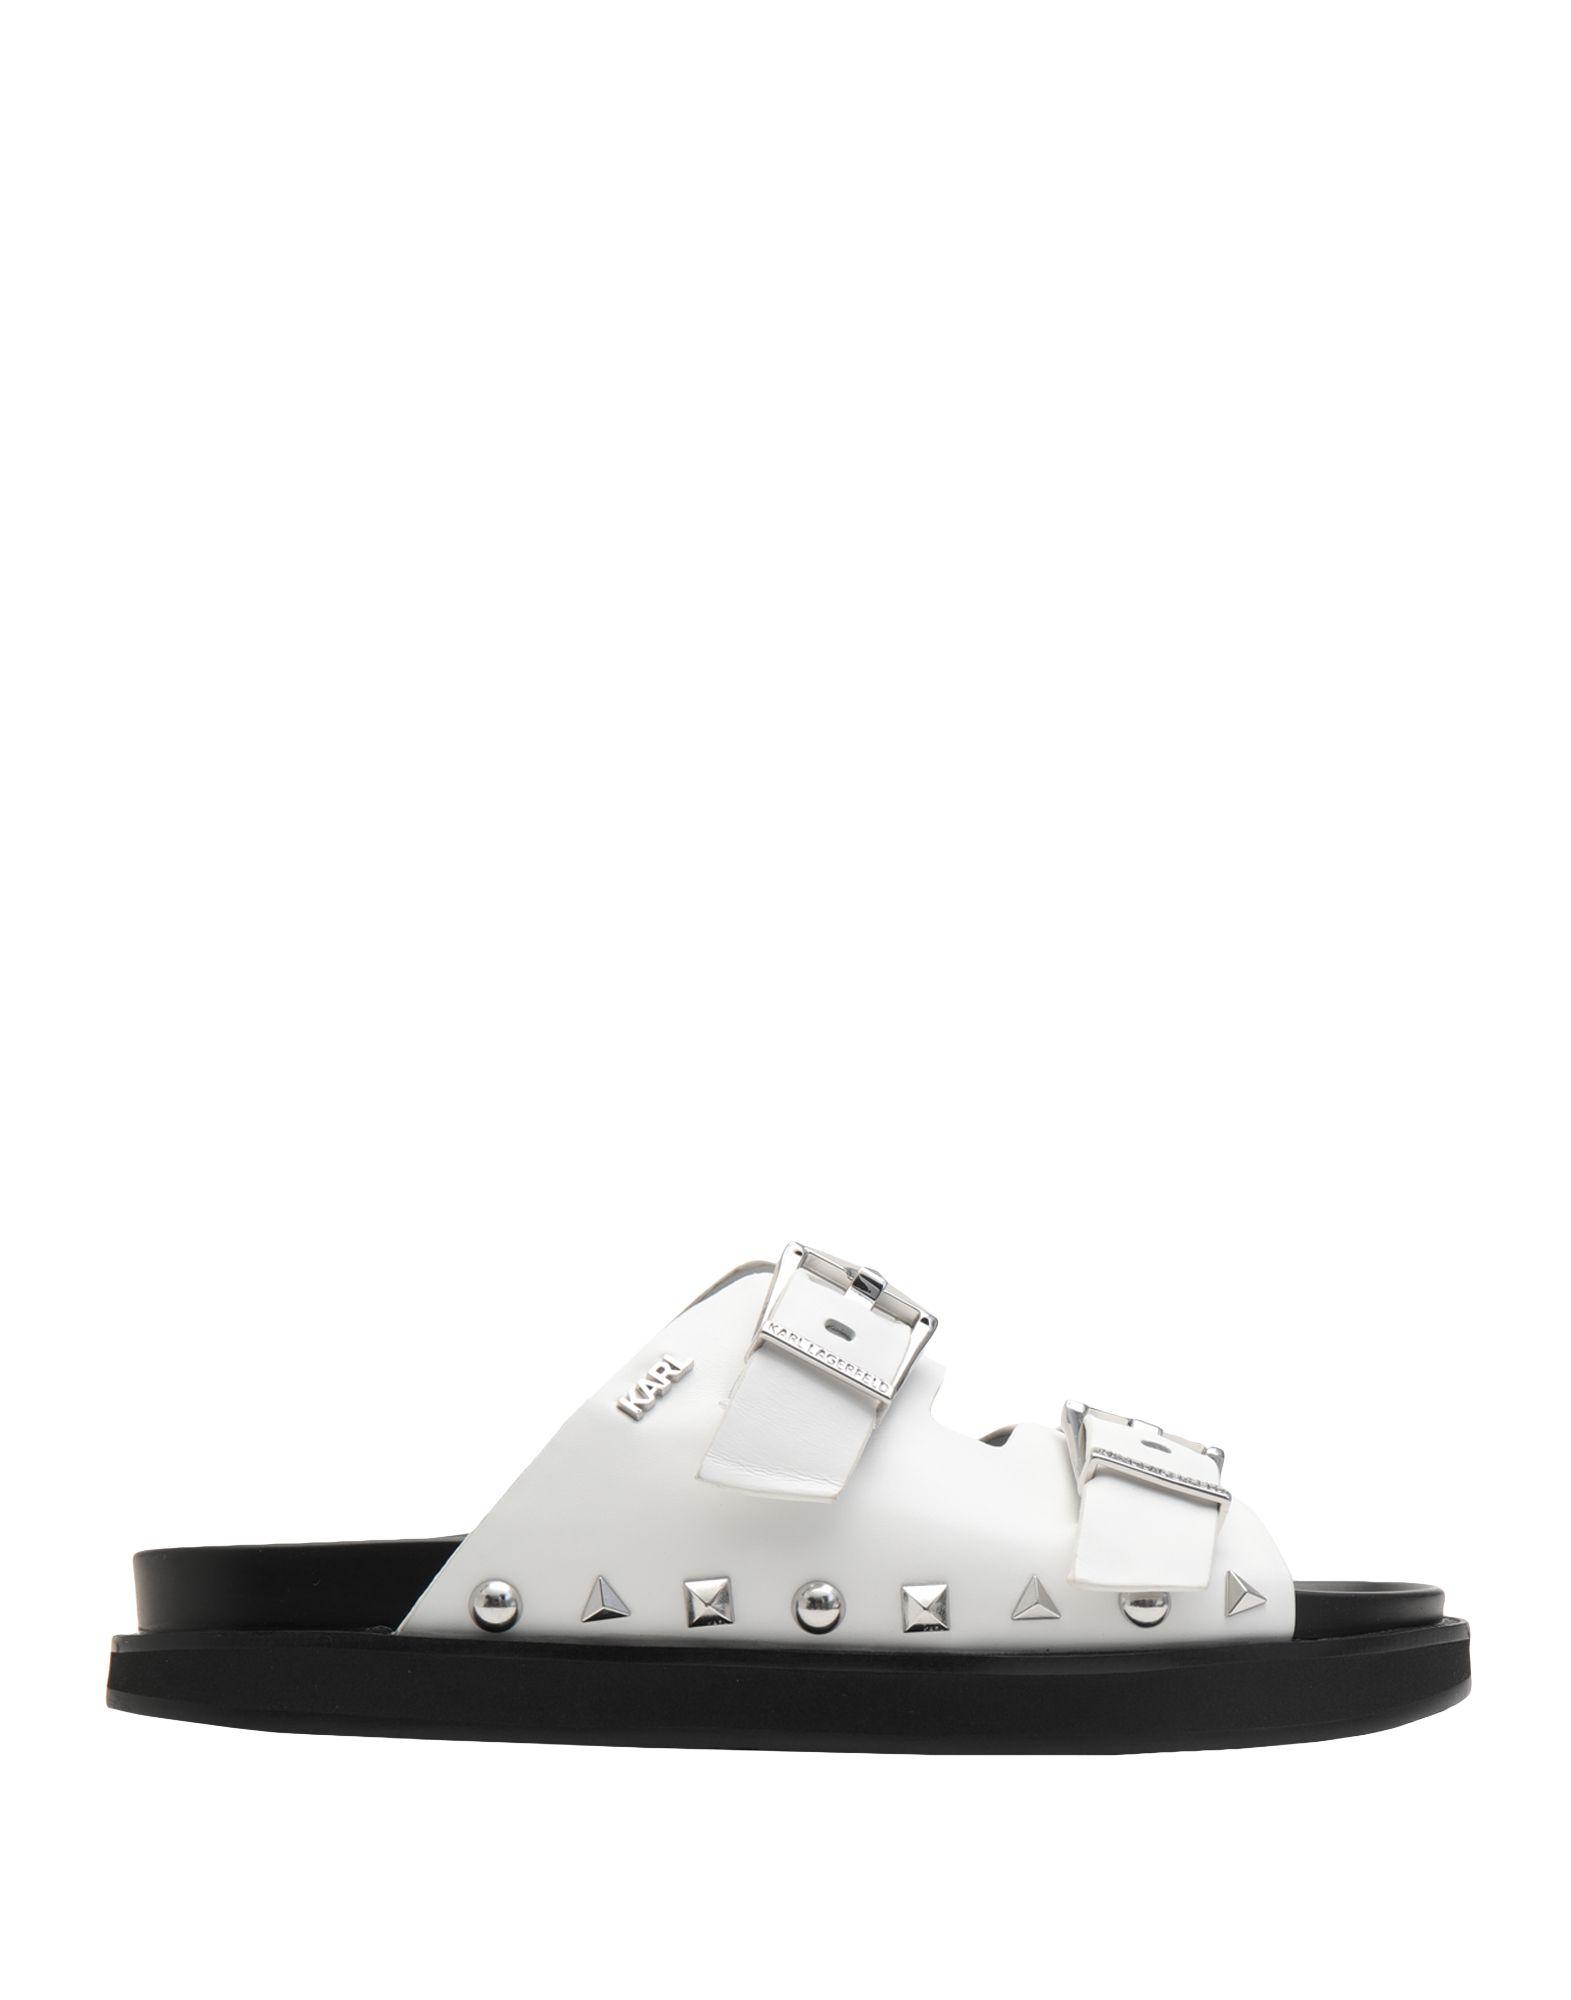 Karl Lagerfeld Leather Sandals in White - Lyst